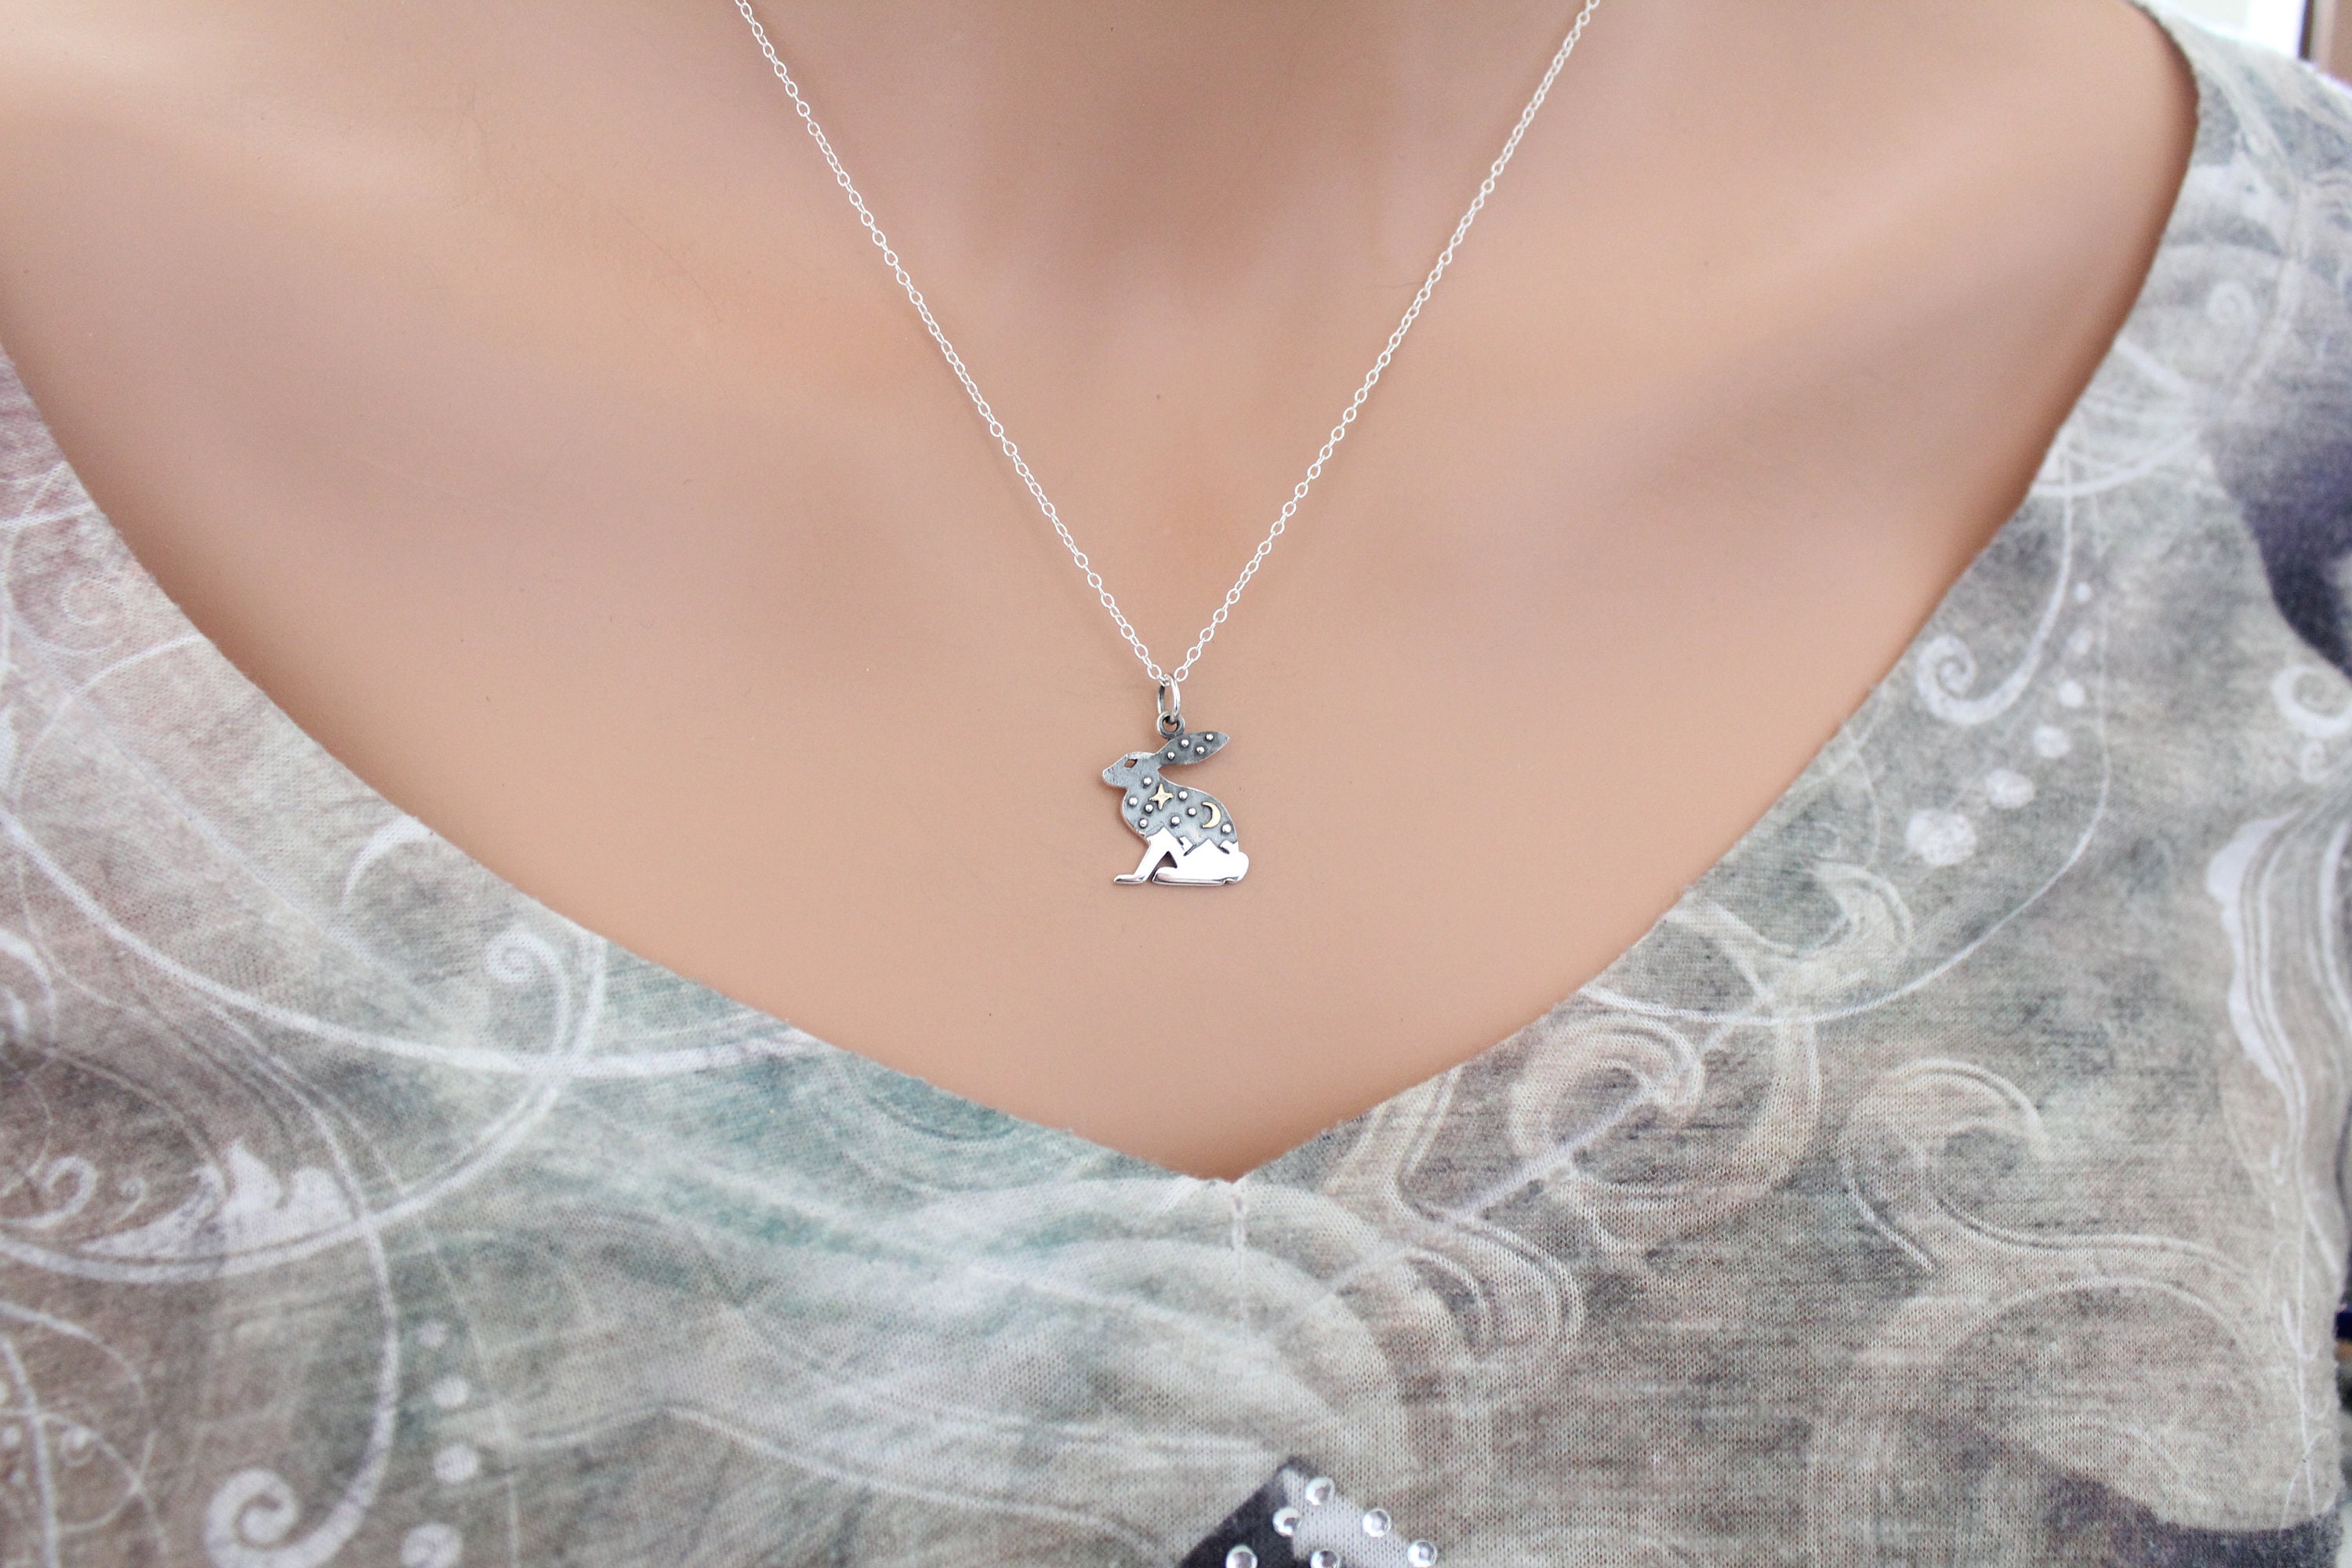 Cable Collectibles Bunny Charm Necklace in Sterling Silver Women's